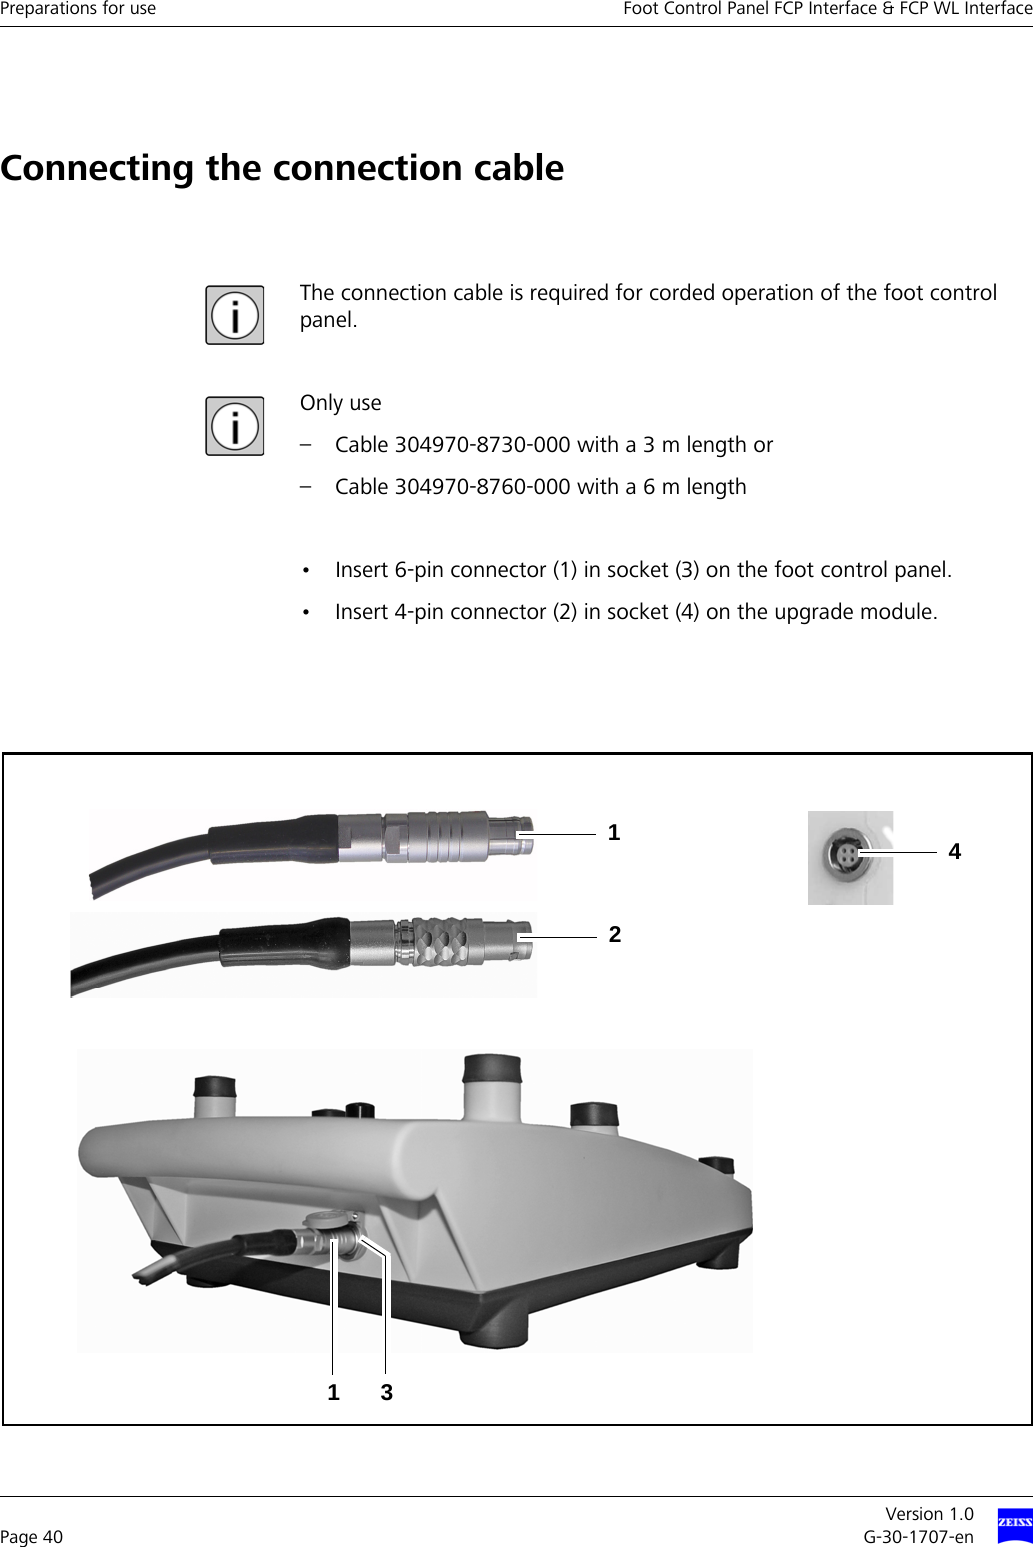 Preparations for use Foot Control Panel FCP Interface &amp; FCP WL InterfaceVersion 1.0Page 40 G-30-1707-enConnecting the connection cableThe connection cable is required for corded operation of the foot control panel.Only use – Cable 304970-8730-000 with a 3 m length or – Cable 304970-8760-000 with a 6 m length• Insert 6-pin connector (1) in socket (3) on the foot control panel.• Insert 4-pin connector (2) in socket (4) on the upgrade module.13214